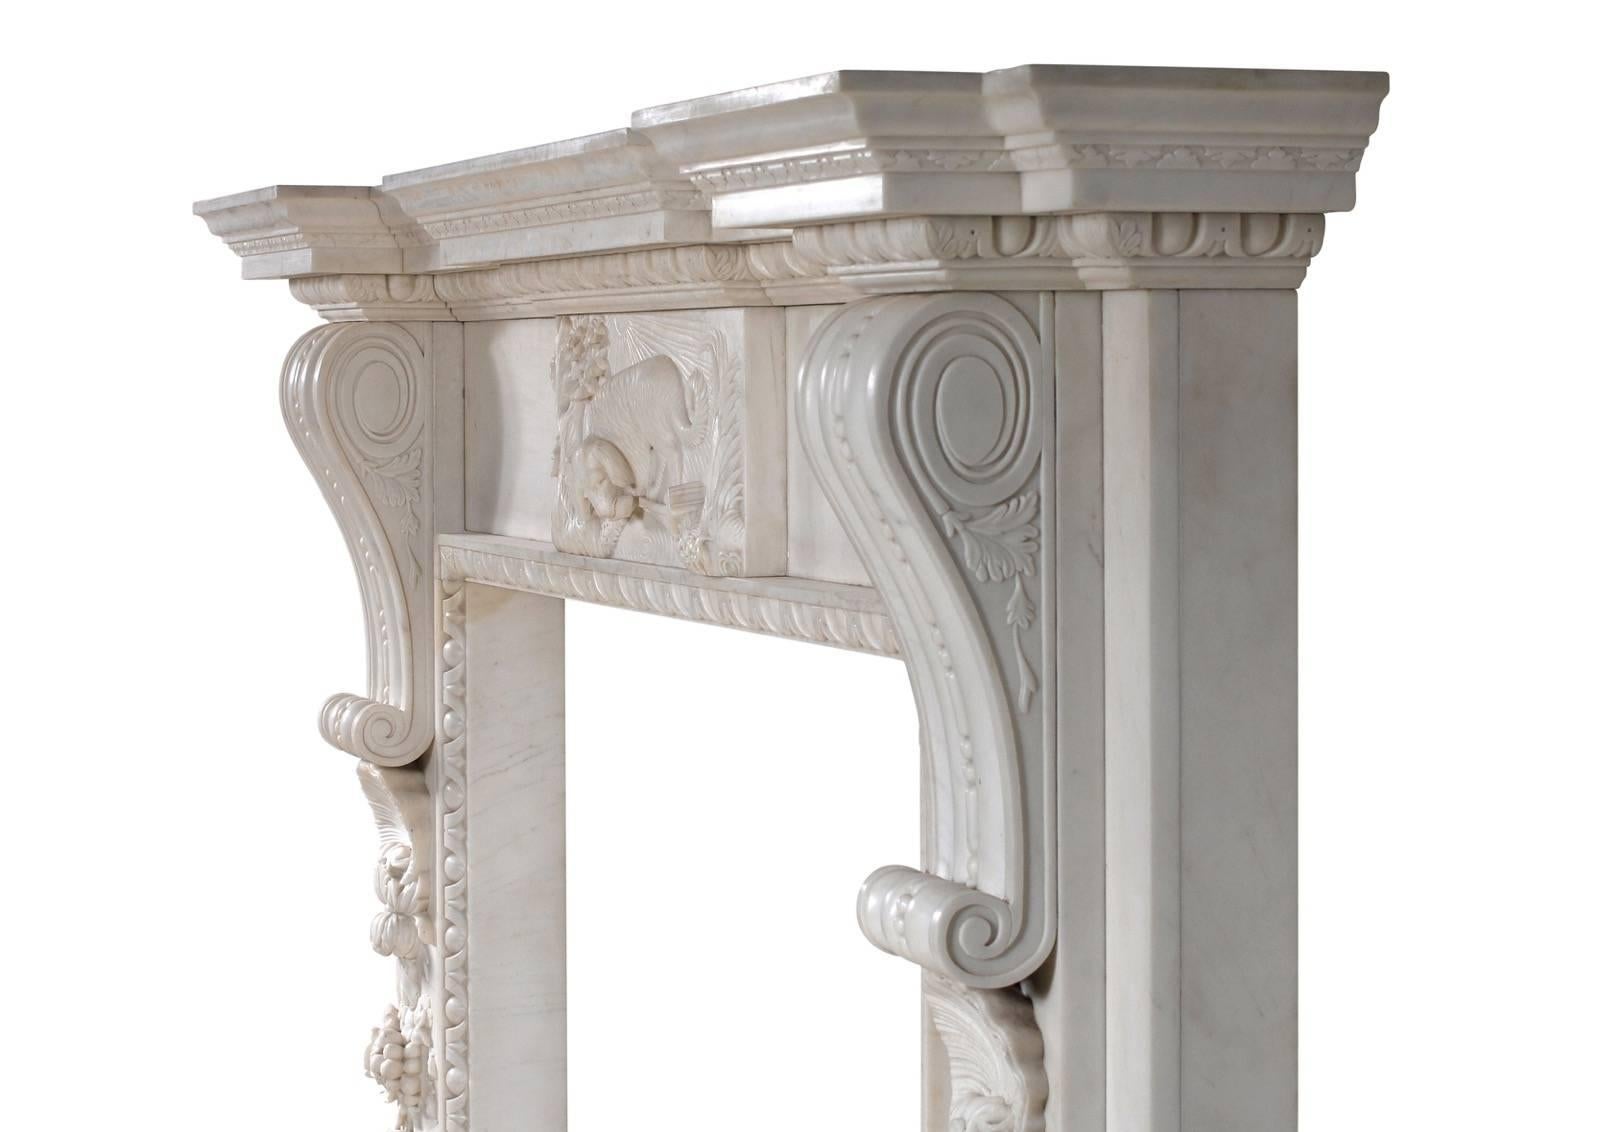 19th Century Mid-Georgian Style Fireplace in White Marble